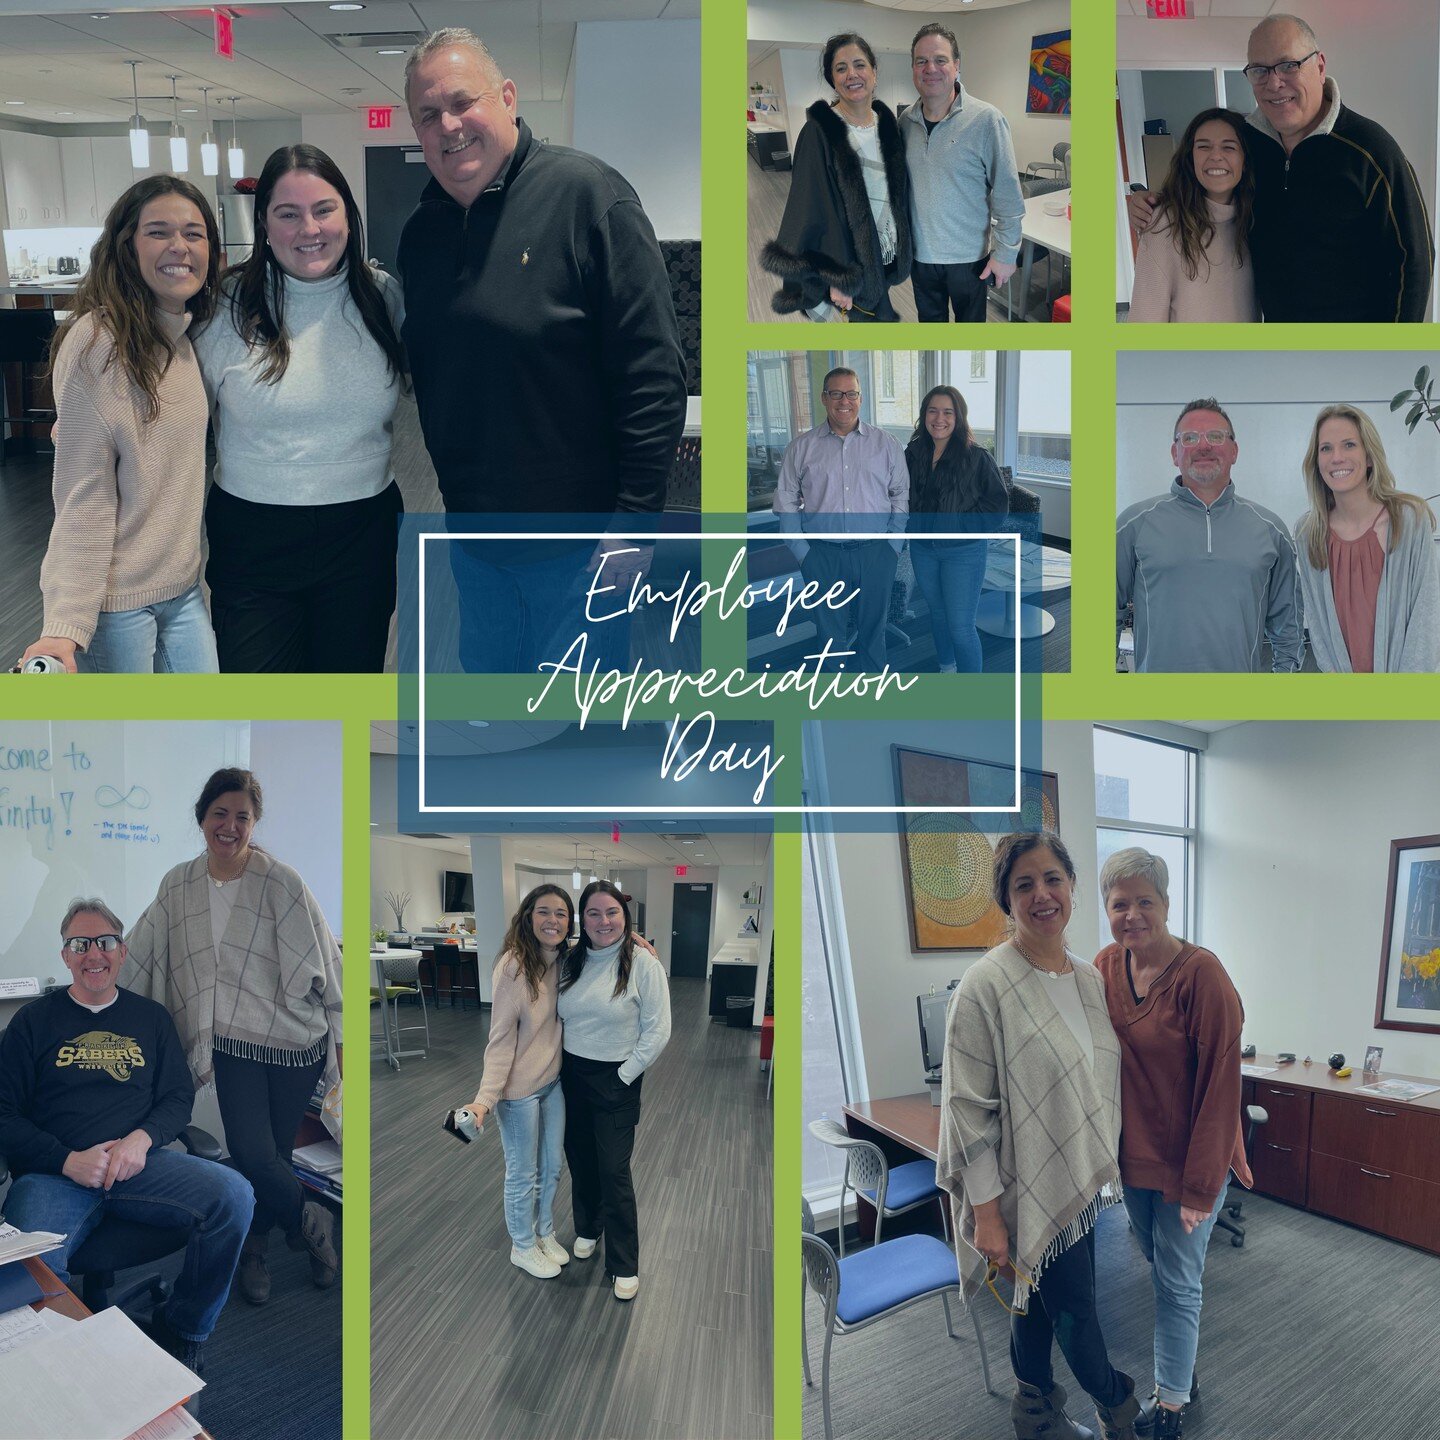 Today, our office gathered to celebrate our incredible Infinity team in honor of the March 1st holiday, Employee Appreciation Day! To each and every one of our hardworking and dedicated employees, we extend our heartfelt gratitude for your passion an